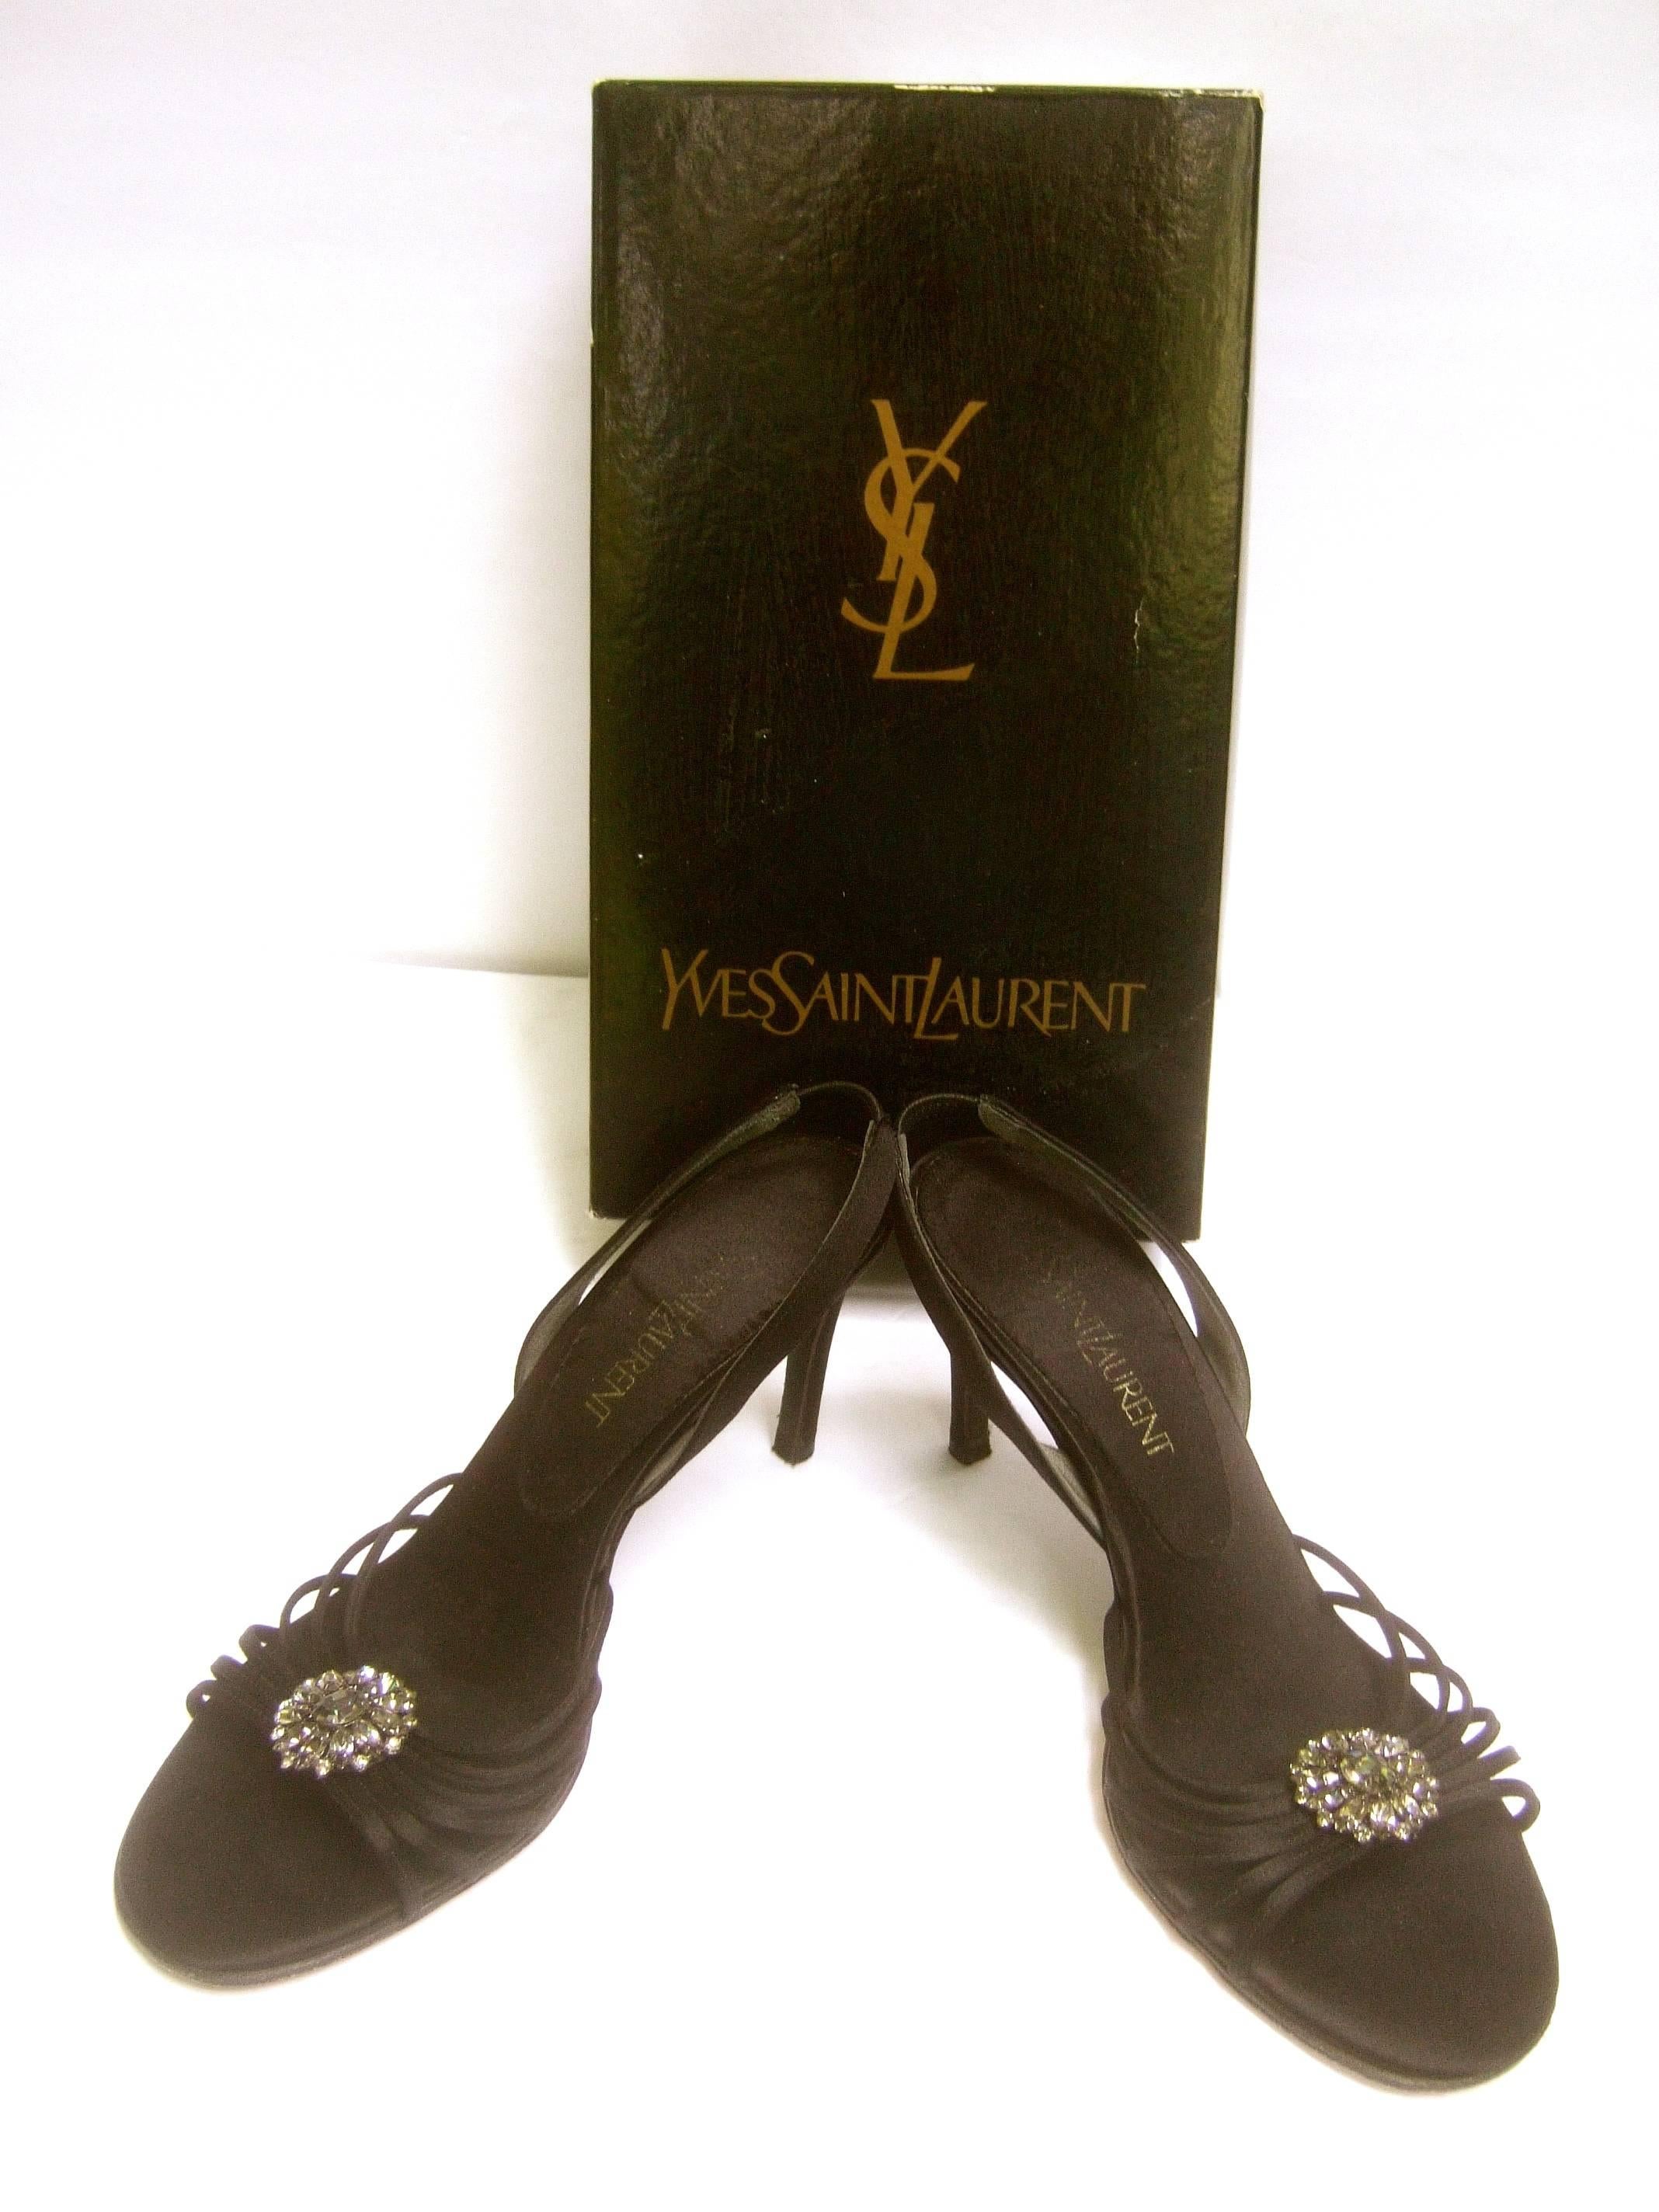 Yves Saint Laurent Black Crystal Satin Pumps in YSL Box Size 7.5 M In Good Condition For Sale In University City, MO